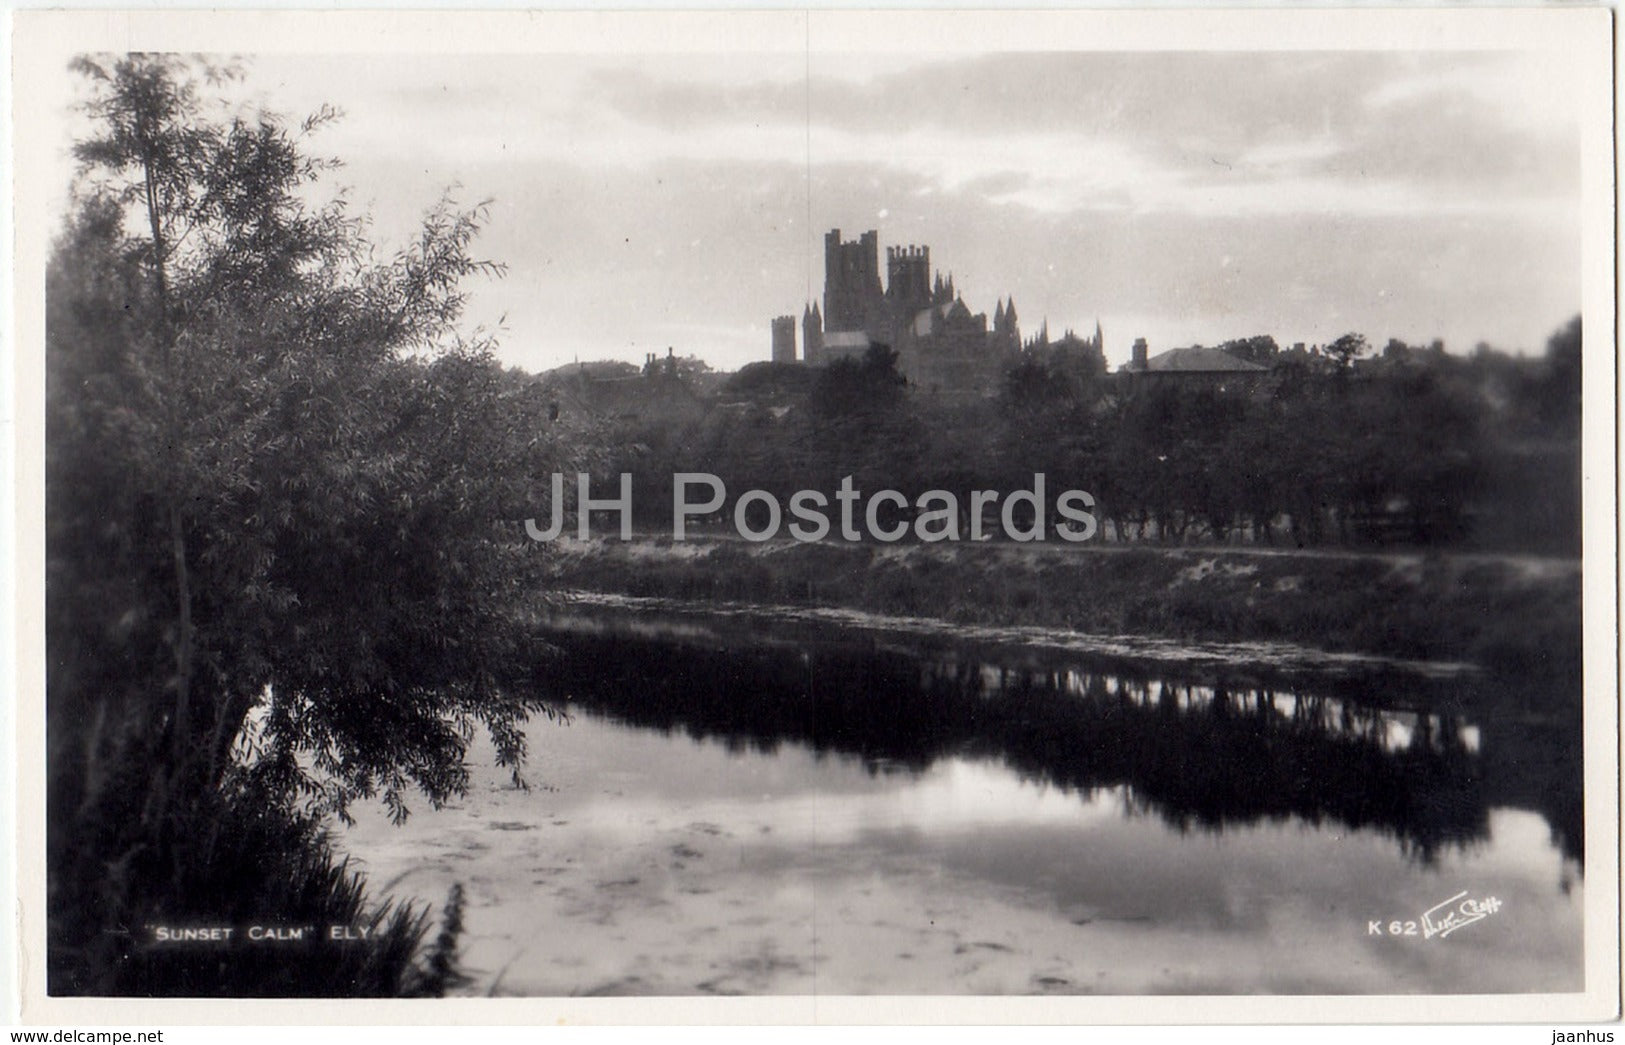 Ely - Sunset Calm - cathedral - K 62 - 1961 - United Kingdom - England - used - JH Postcards